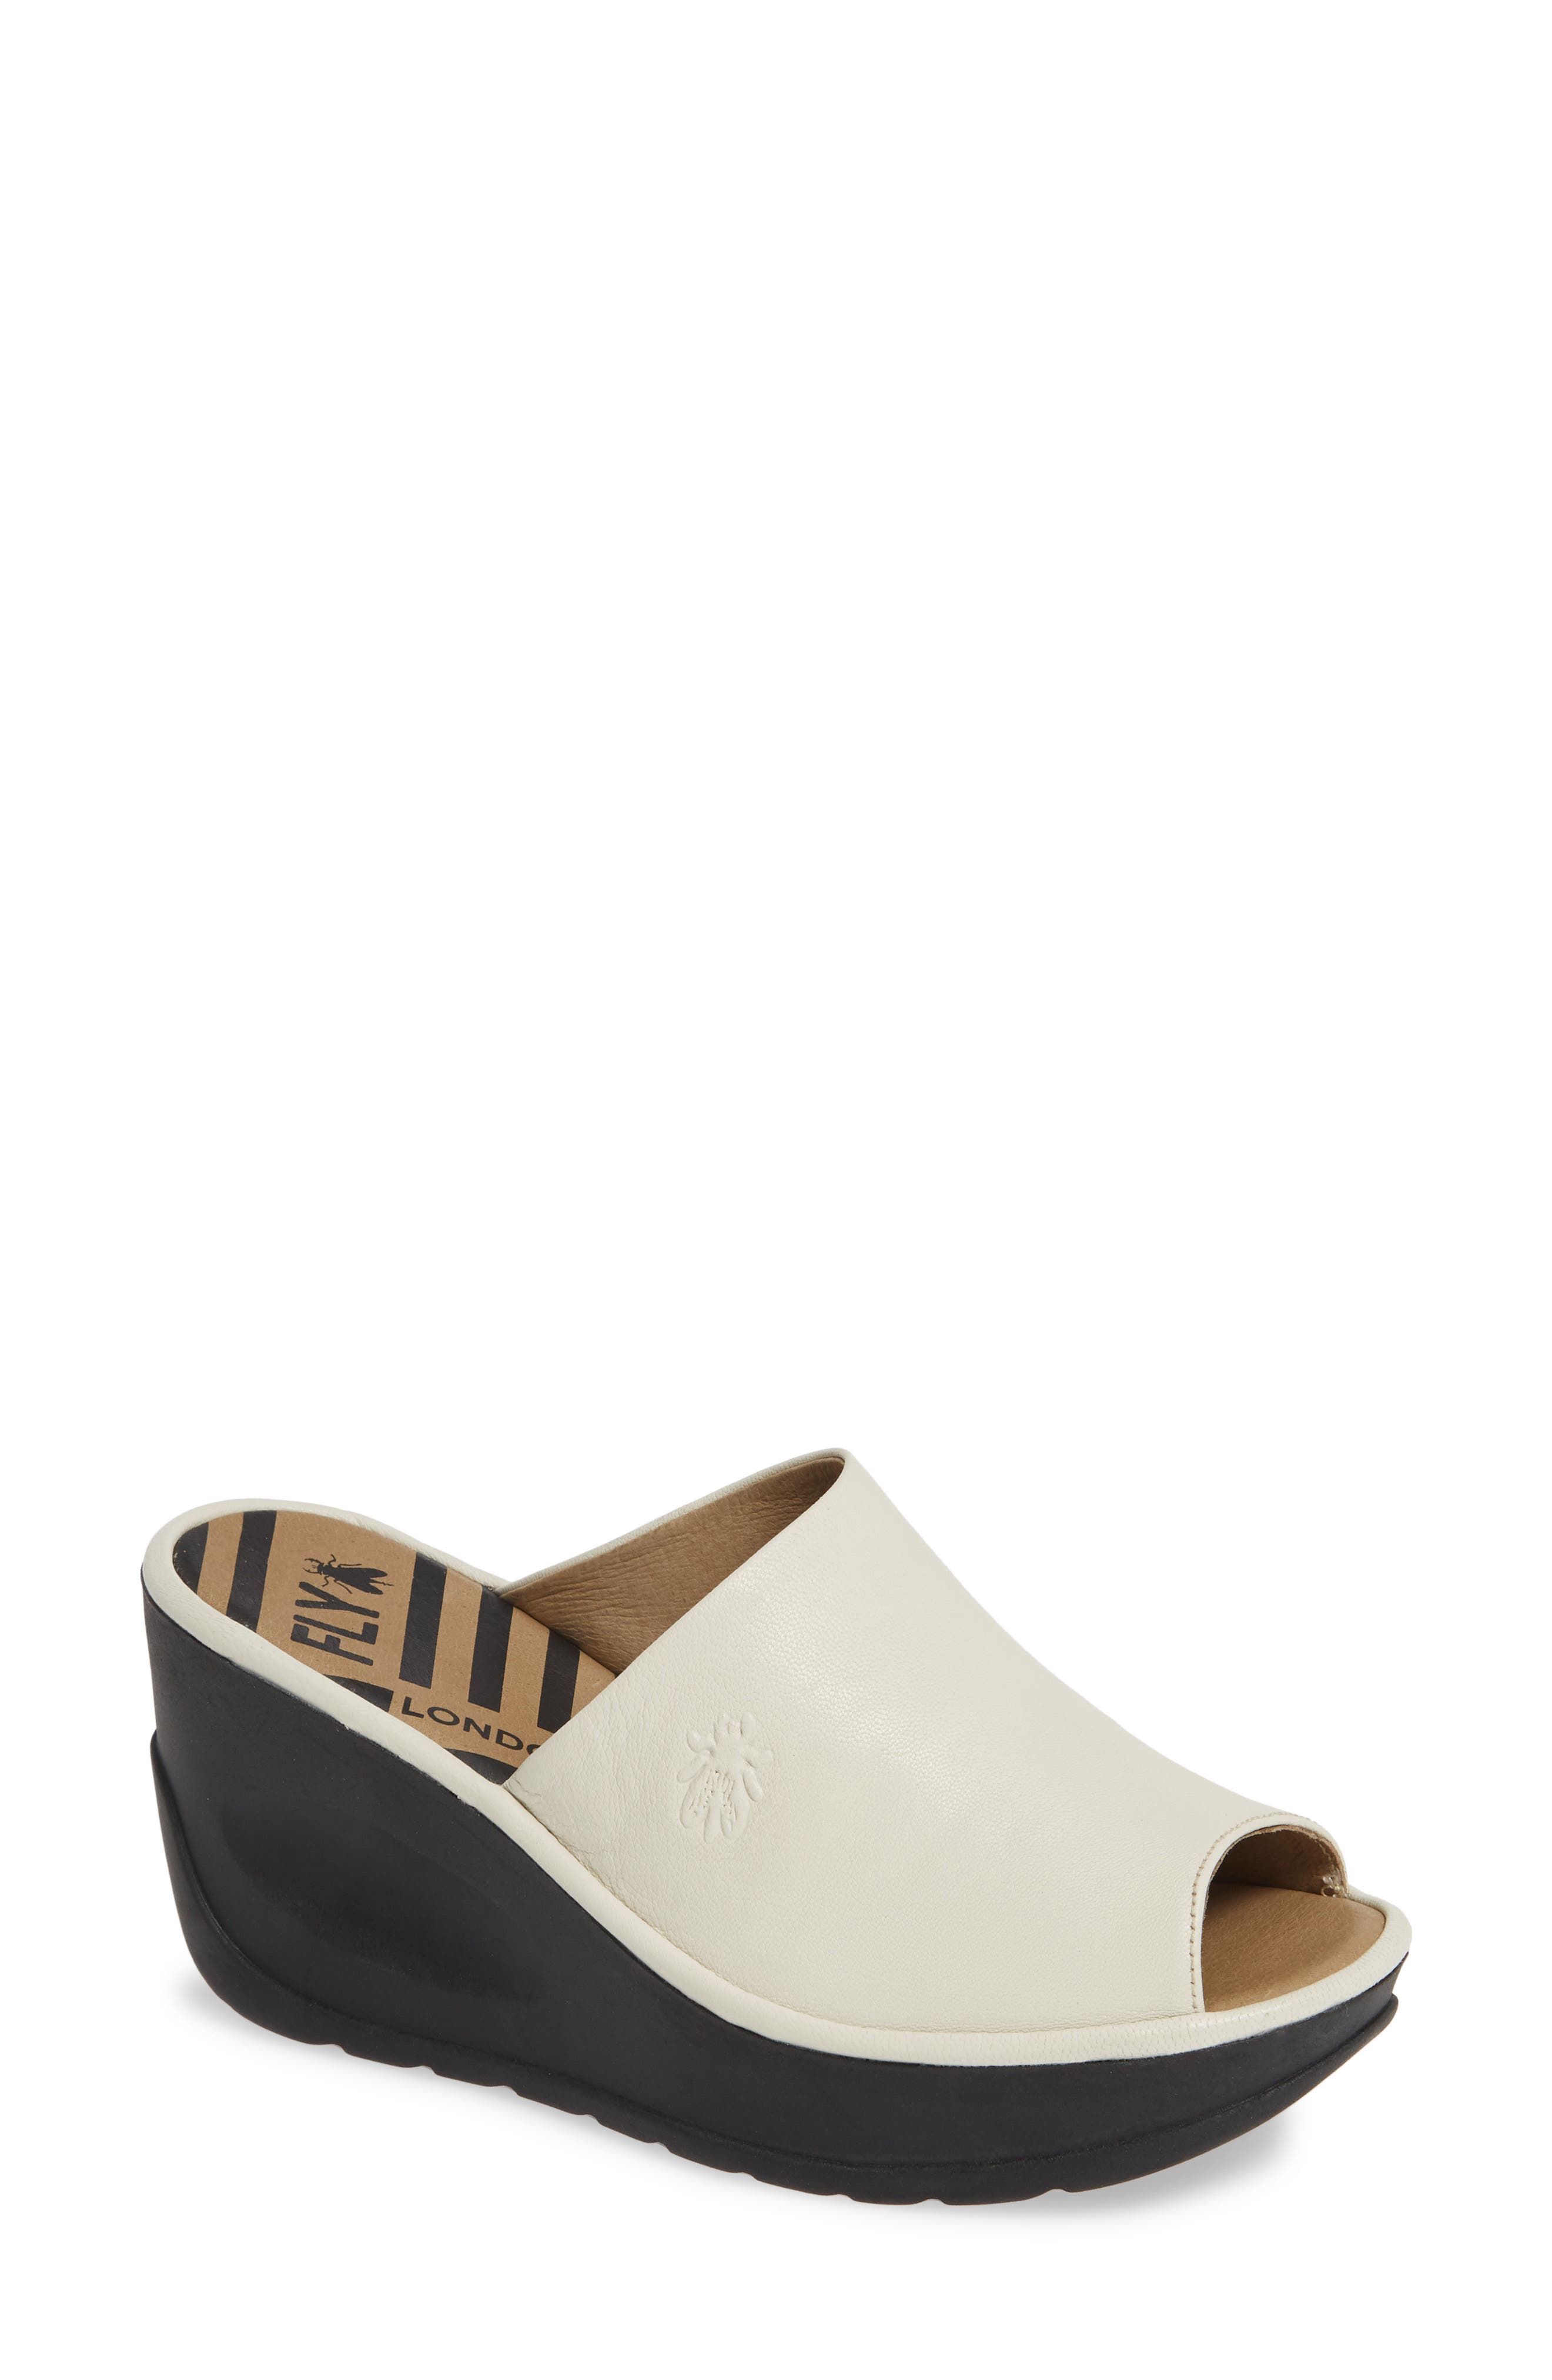 fly london jamb wedge